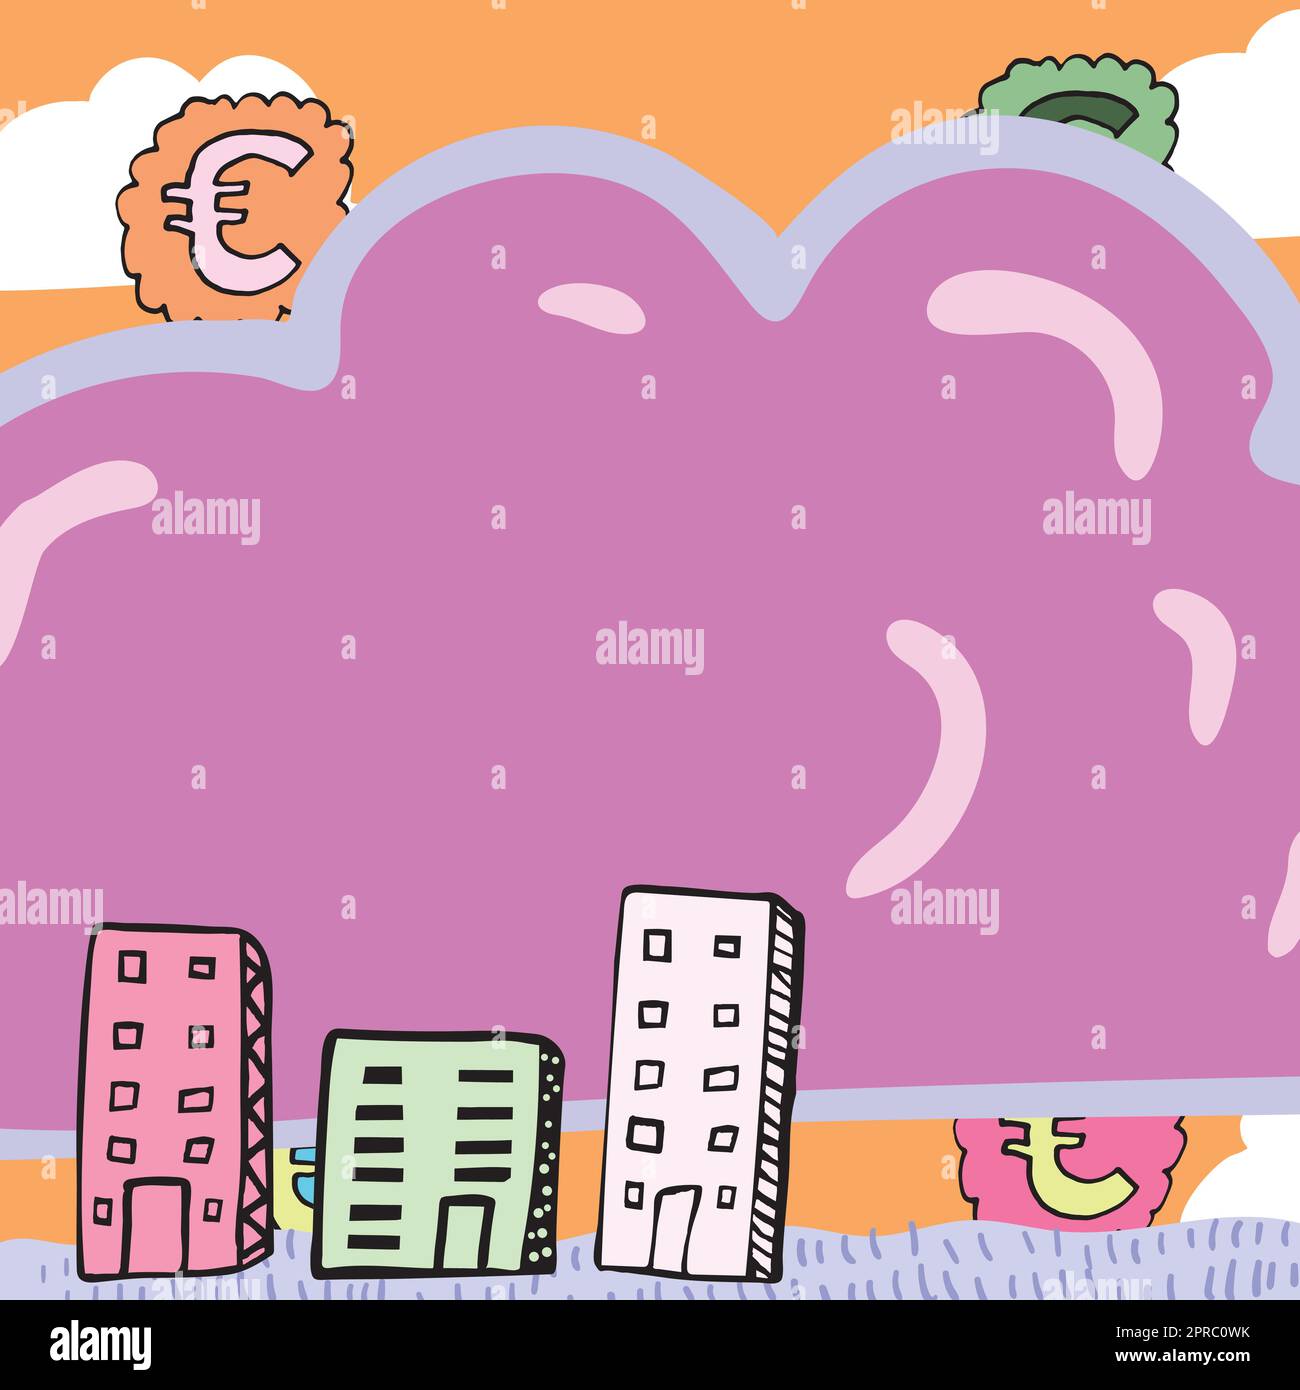 Important Message Written In Shape Of Cloud With Euro Signs In Background And Buildings. Crutial Informations In Cloudy Form With Symbols And Houses Around. Stock Vector